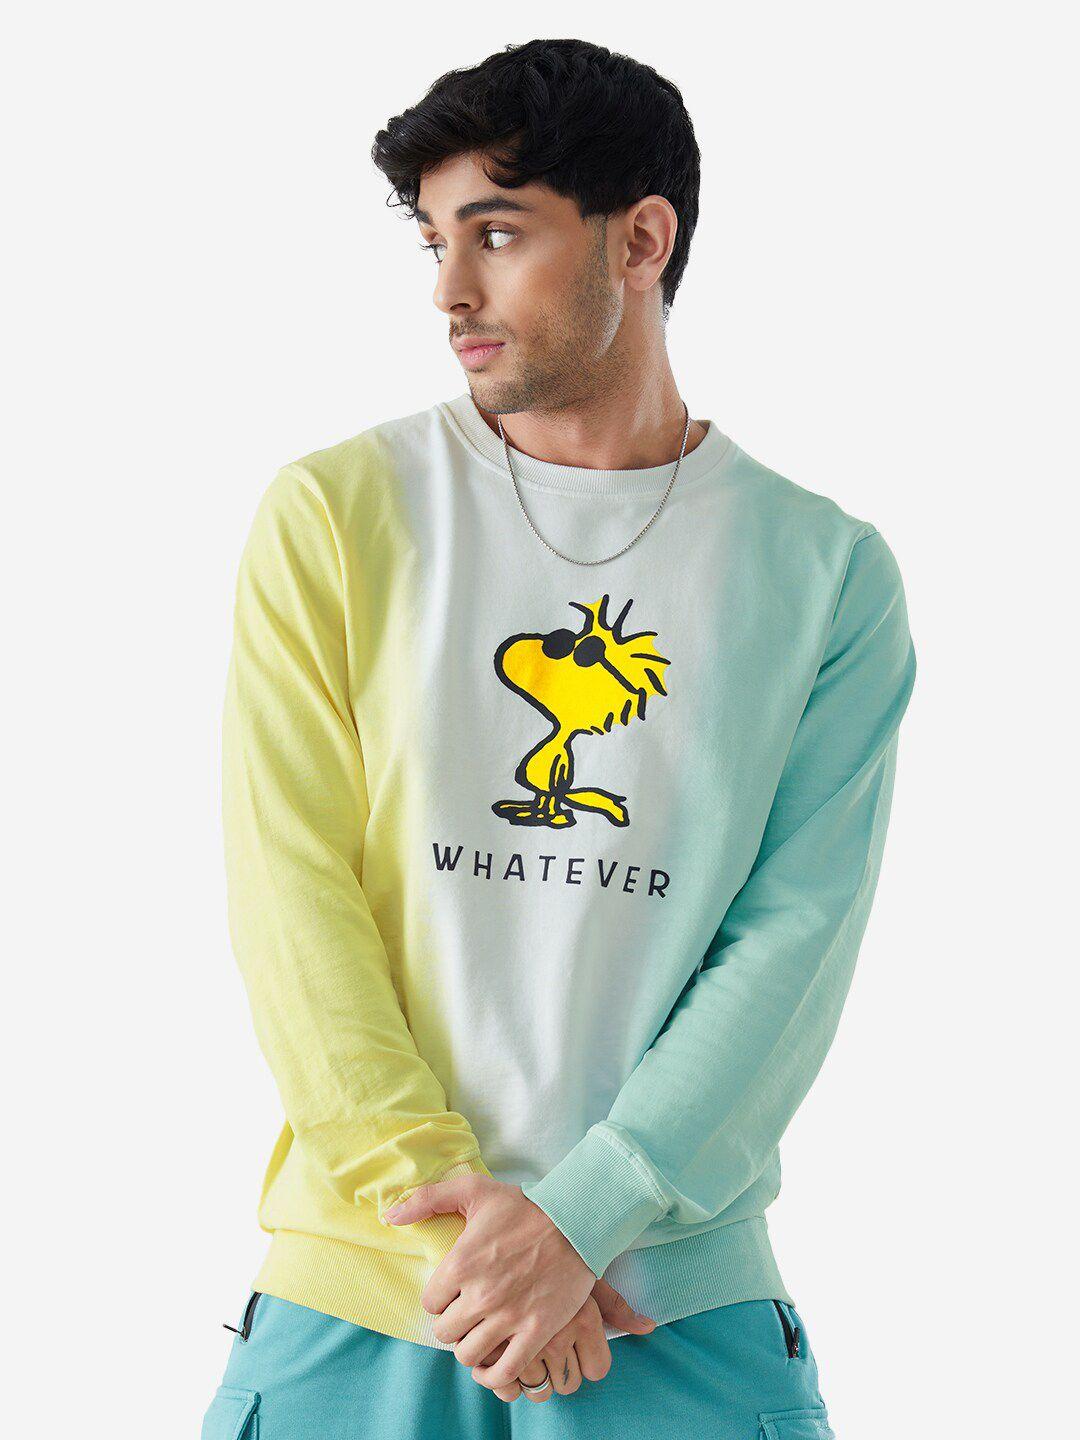 the-souled-store-men-pure-cotton-peanuts-stay-cool-printed-sweatshirt